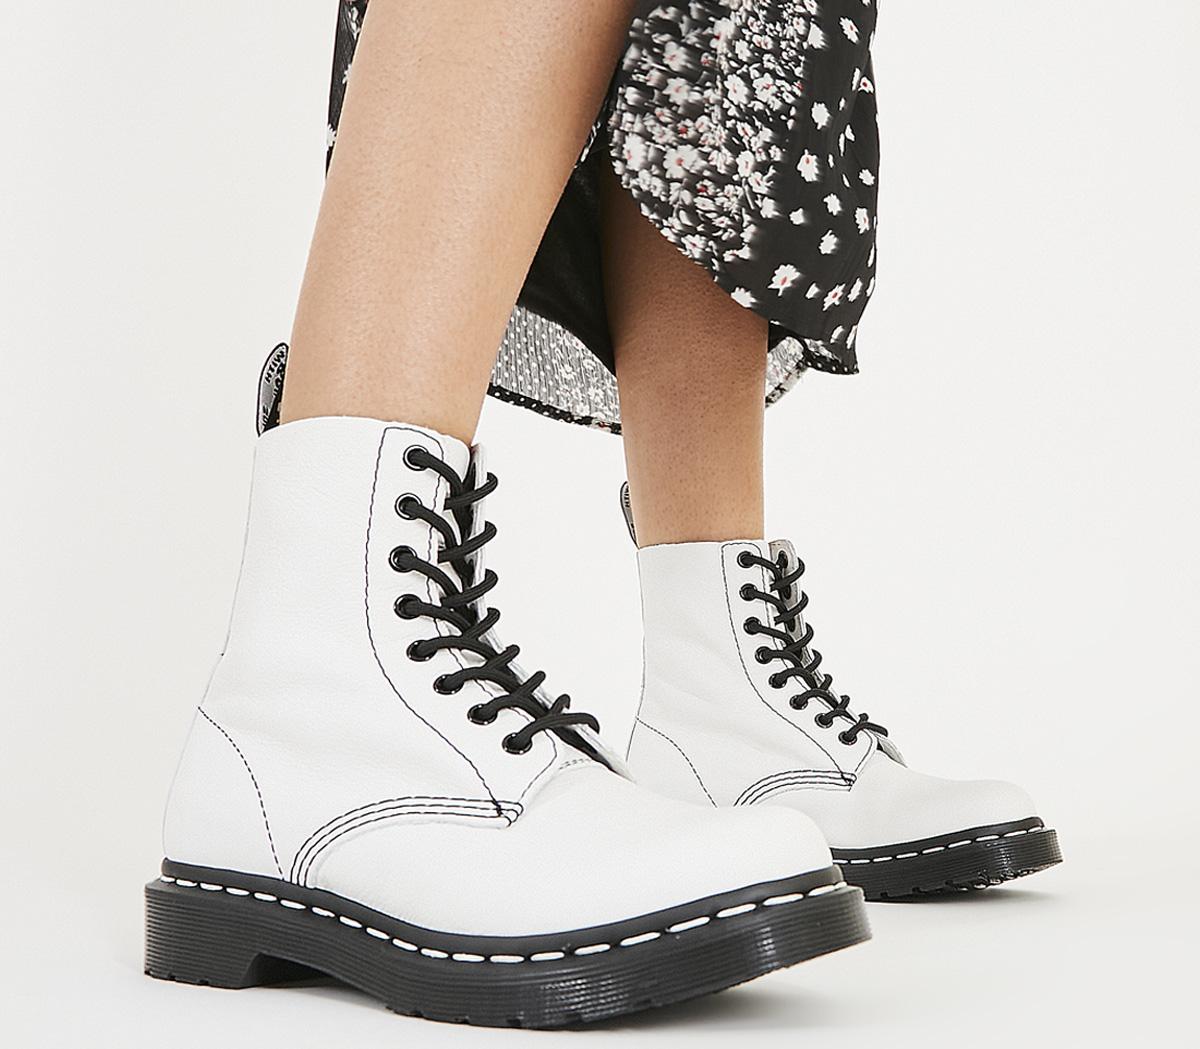 Dr. Martens 8 Eyelet Lace Up Boots 